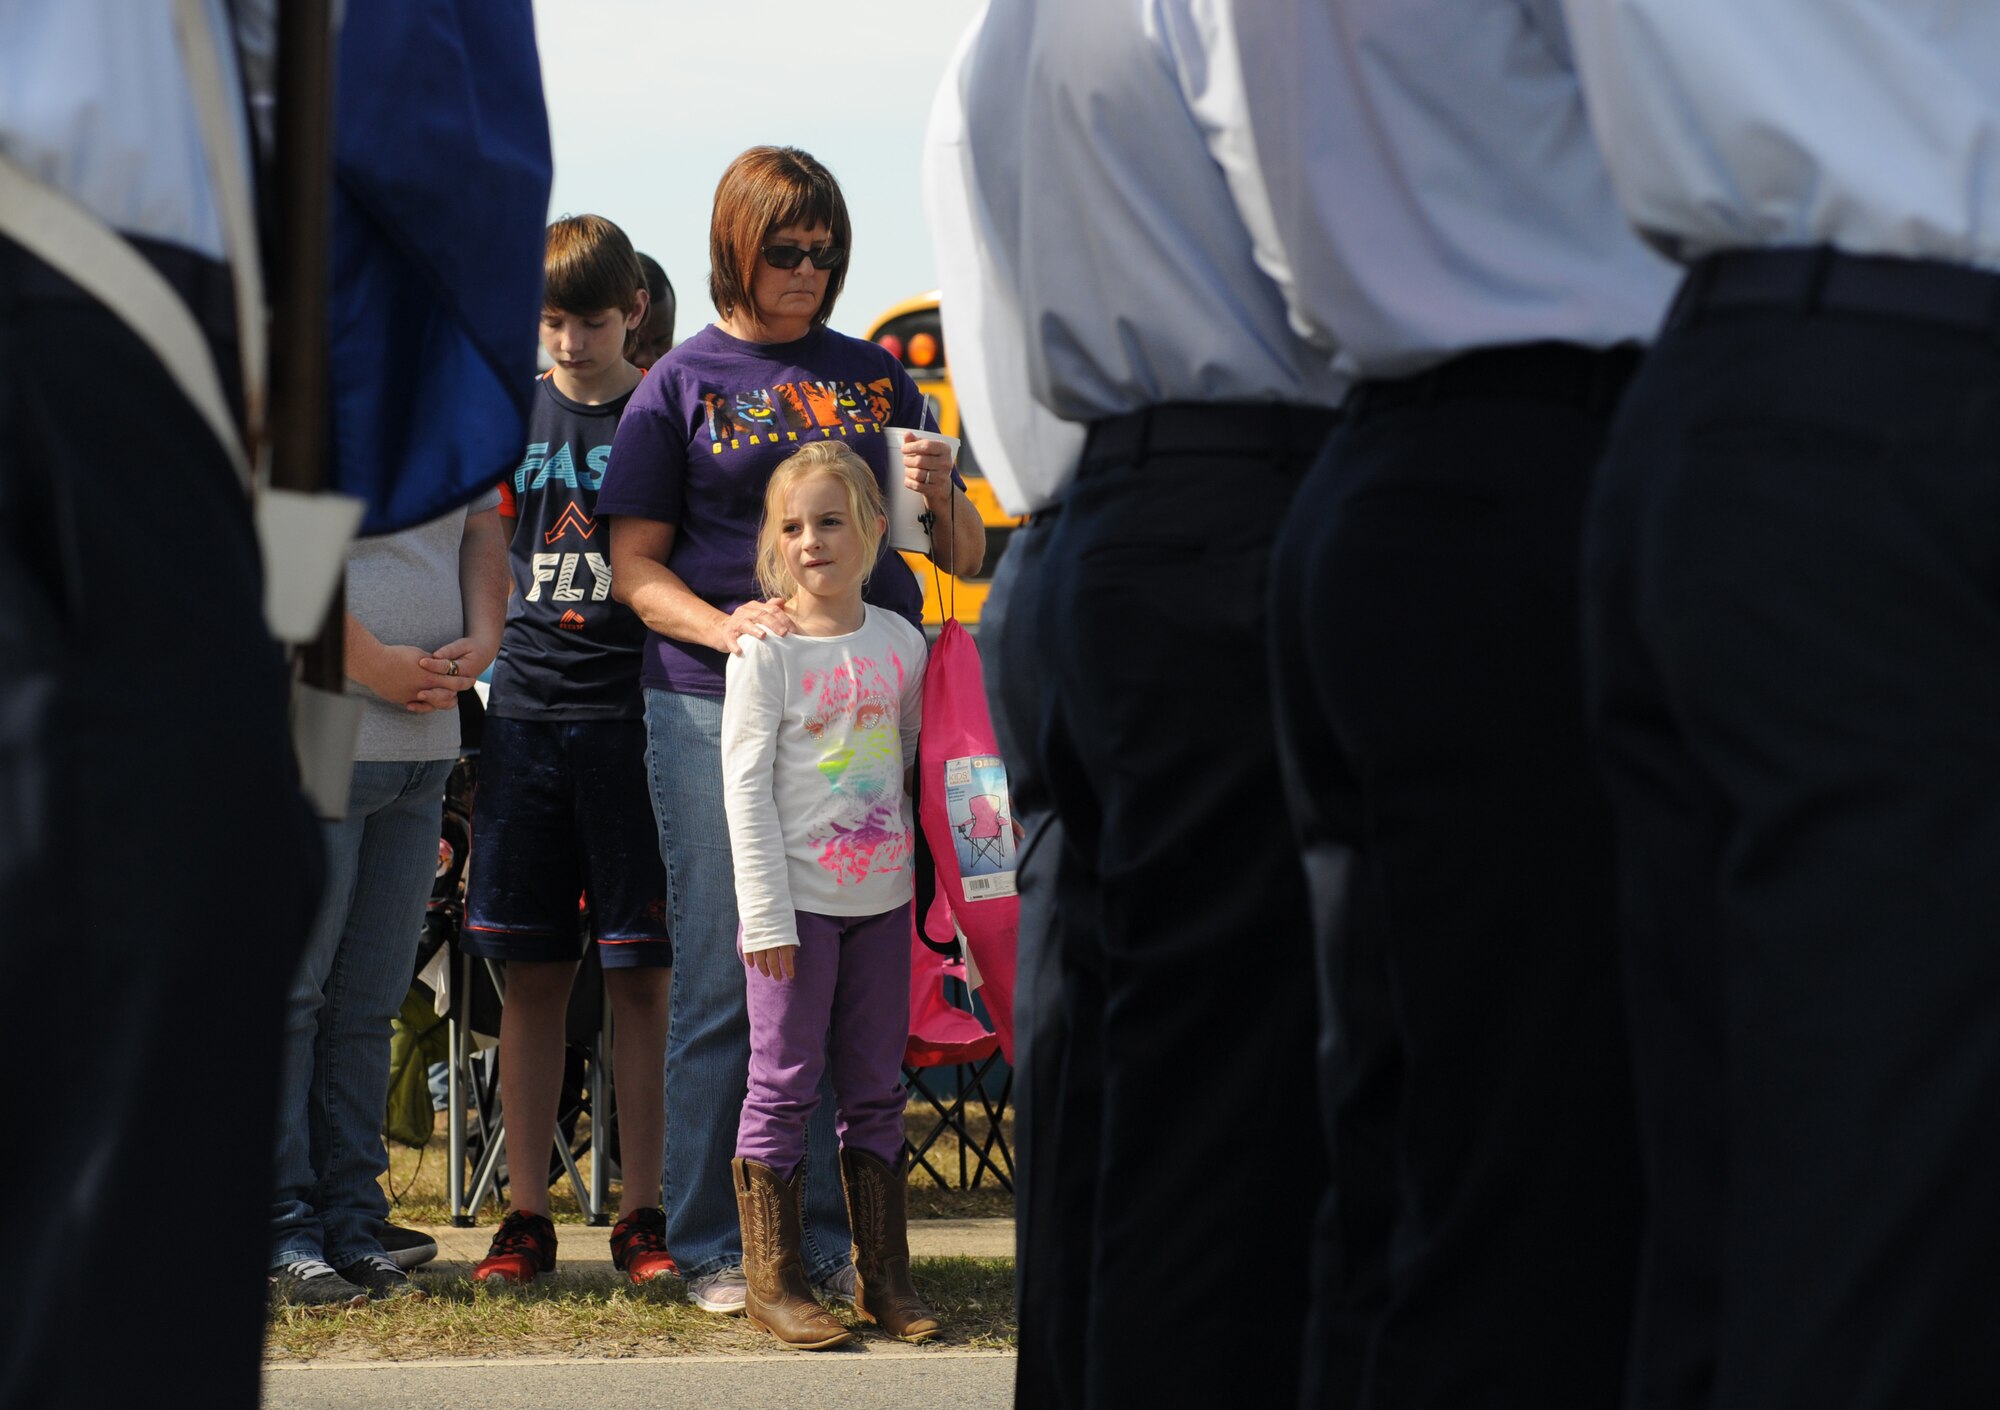 Attendees participate in a prayer before the 16th Annual Gulf Coast Veterans Day Parade Nov. 12, 2016, in D’Iberville, Miss. More than 5,000 Mississippi and Louisiana citizens watched the parade honoring Gulf Coast veterans. Keesler Honor Guard members, base leadership and more than 215 81st Training Group Airmen with the 50 State Flag Team and Drum and Bugle Corps also came out to celebrate the holiday. (U.S. Air Force photo by Senior Airman Holly Mansfield)